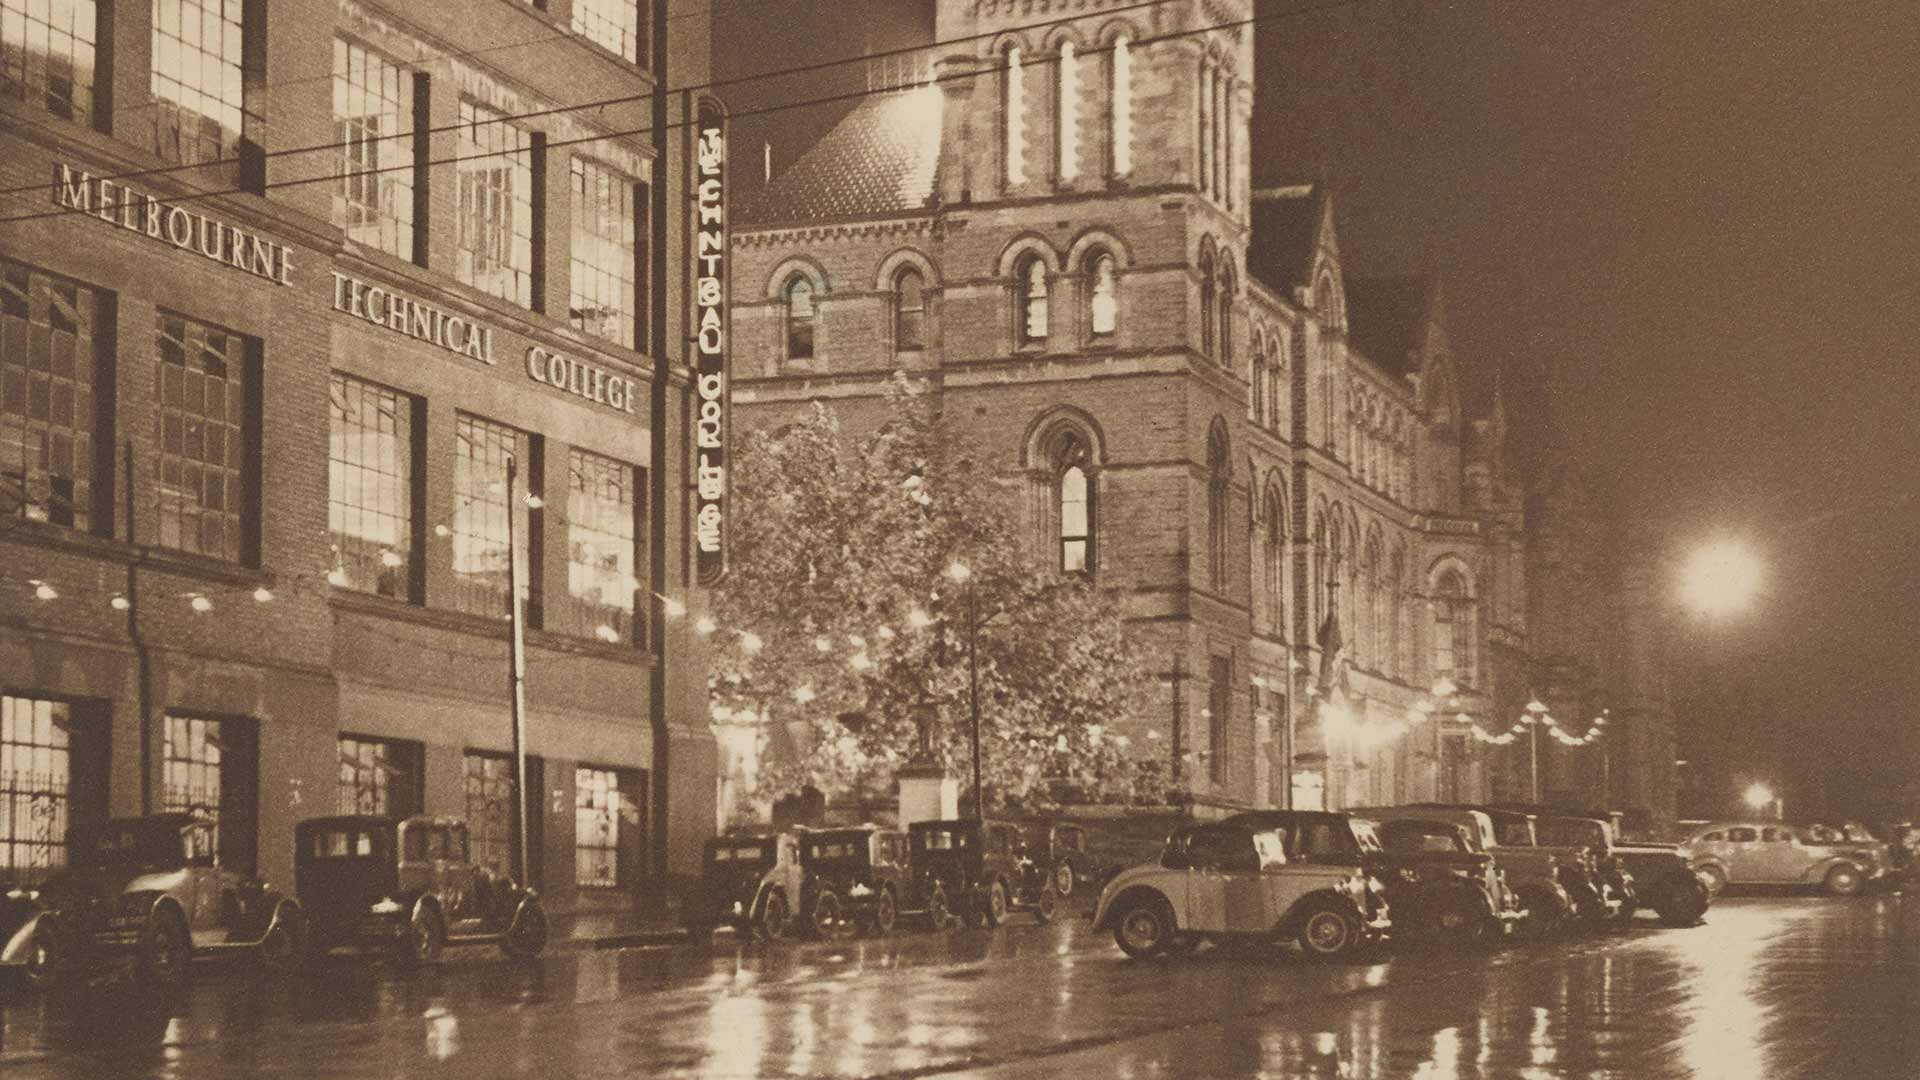 Historical, sepia tone image, of Melbourne Technical College building, at night, with cars parked in front of the building